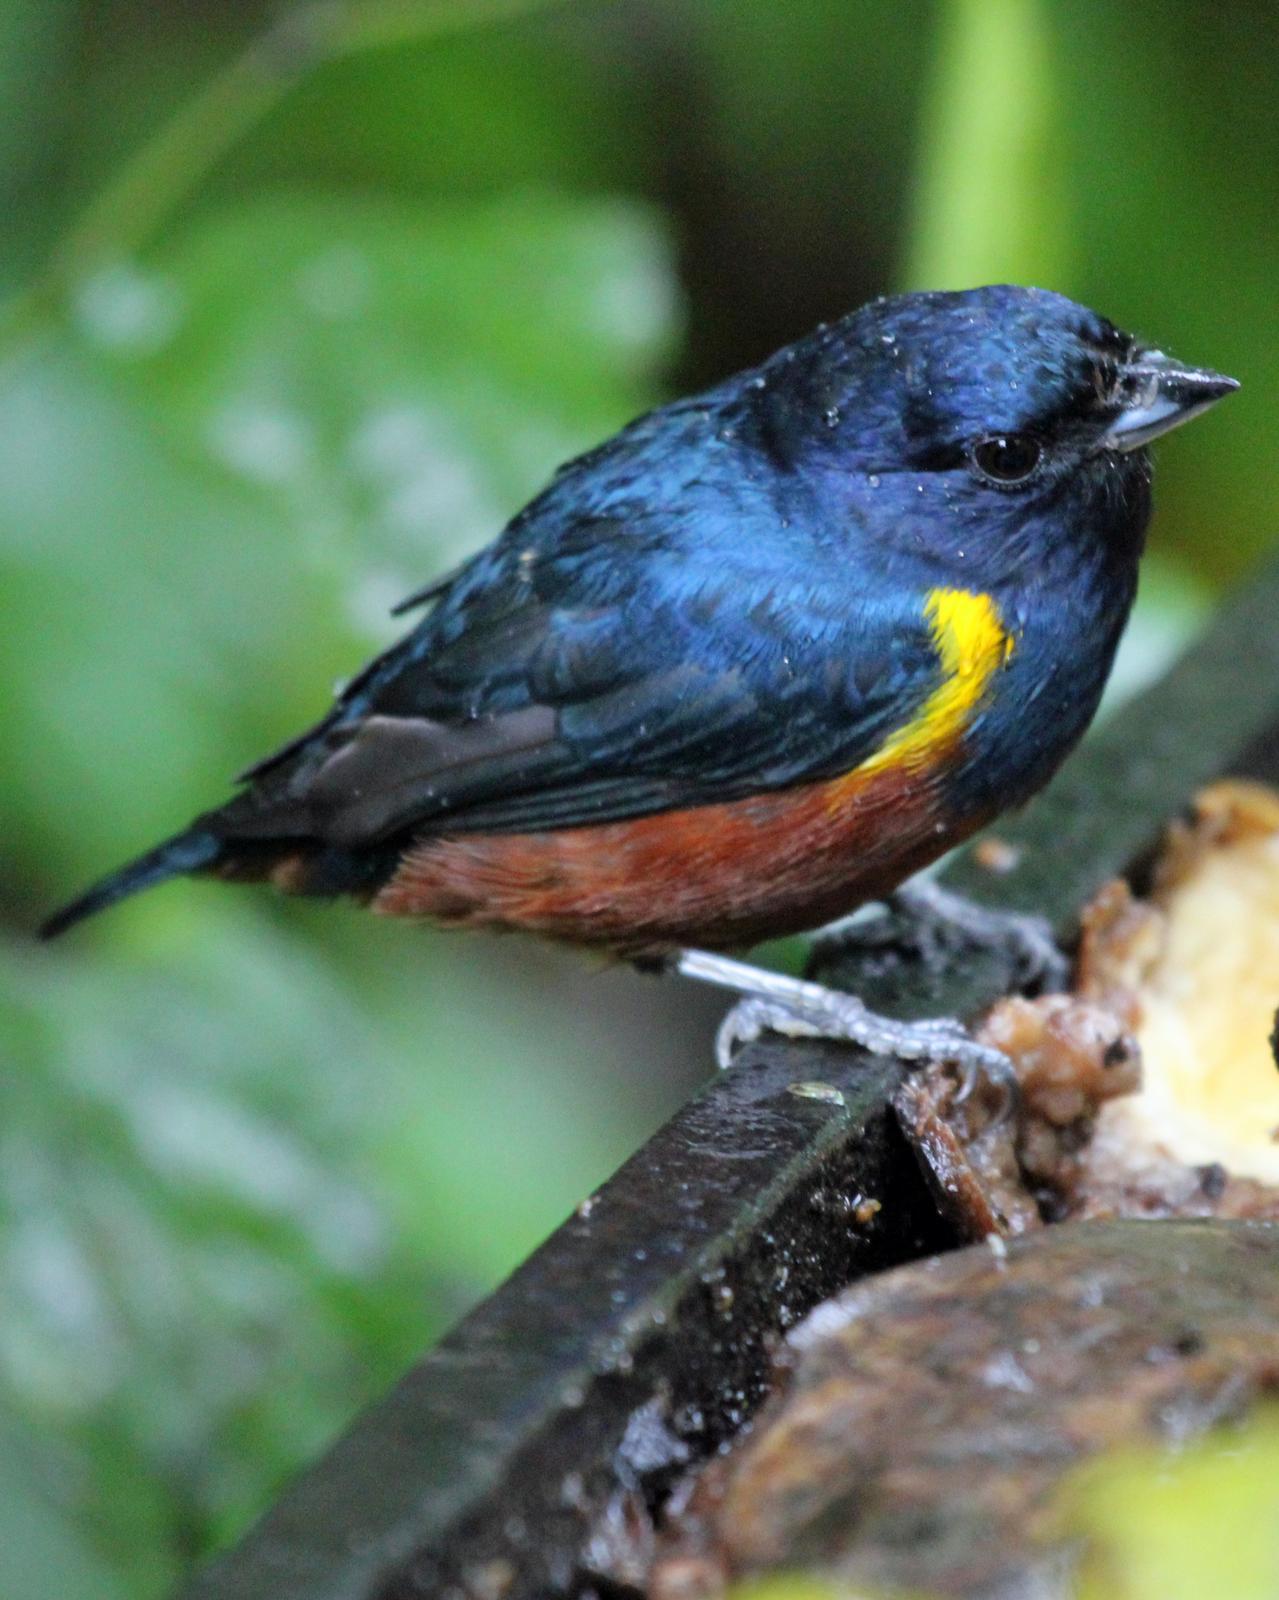 Chestnut-bellied Euphonia Photo by Robert Polkinghorn